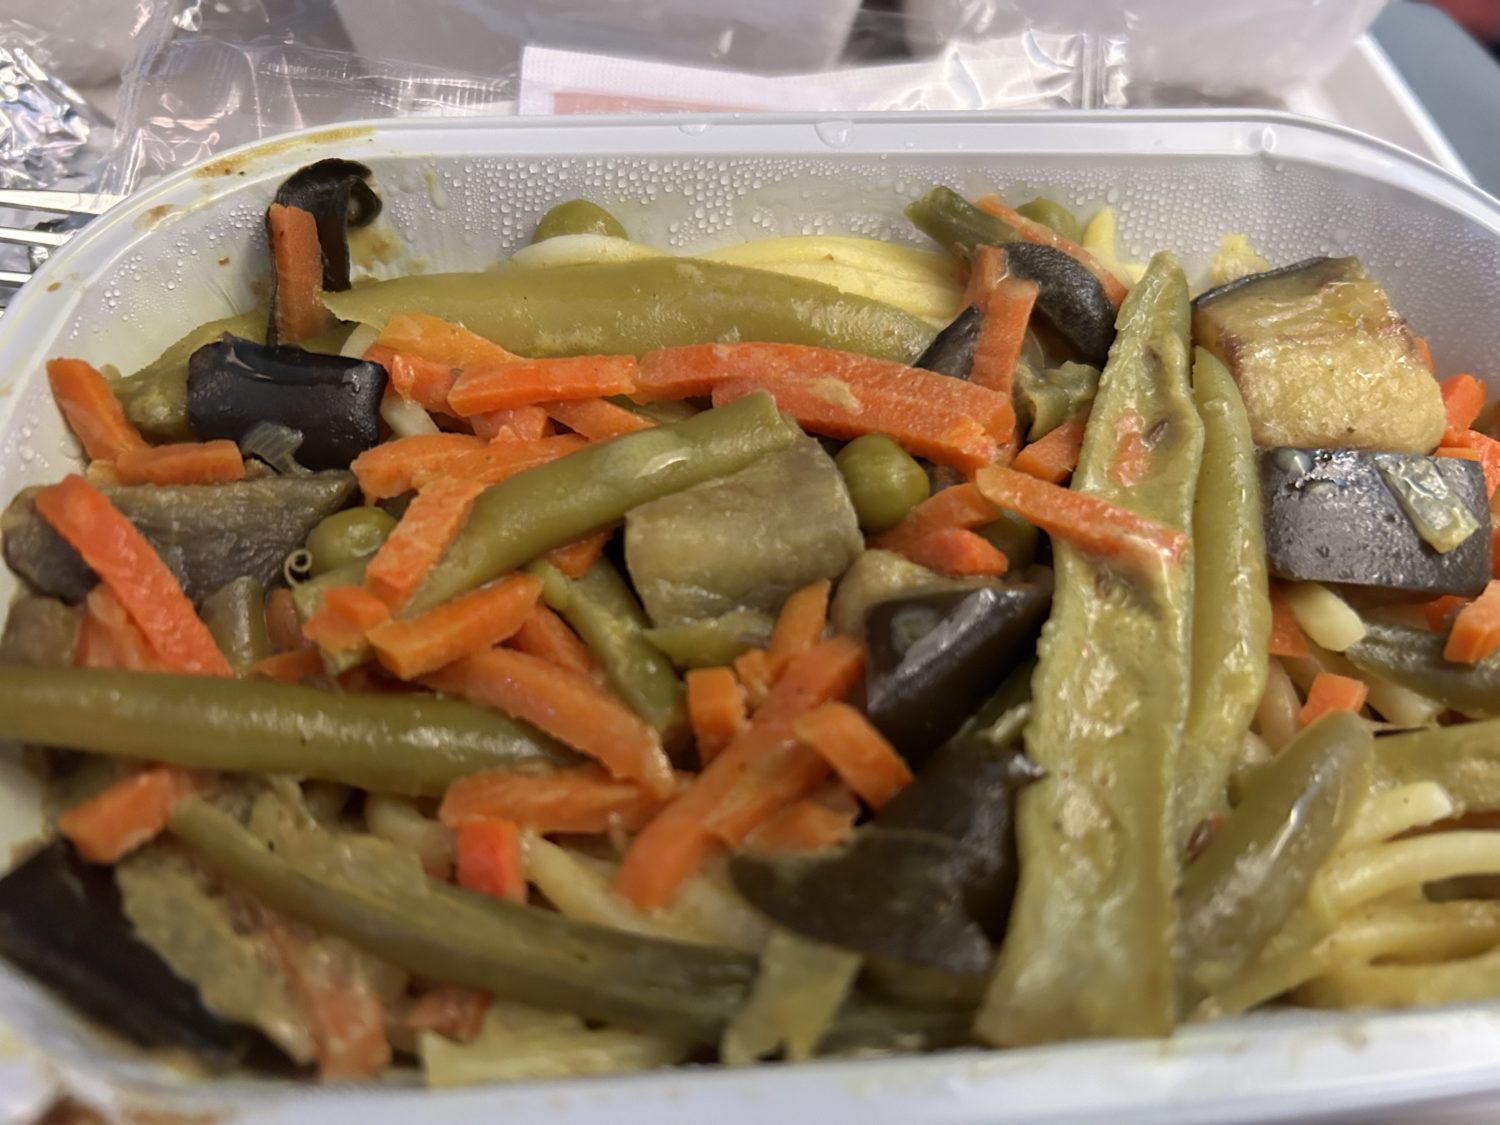 A plastic container filled with meat and vegetables